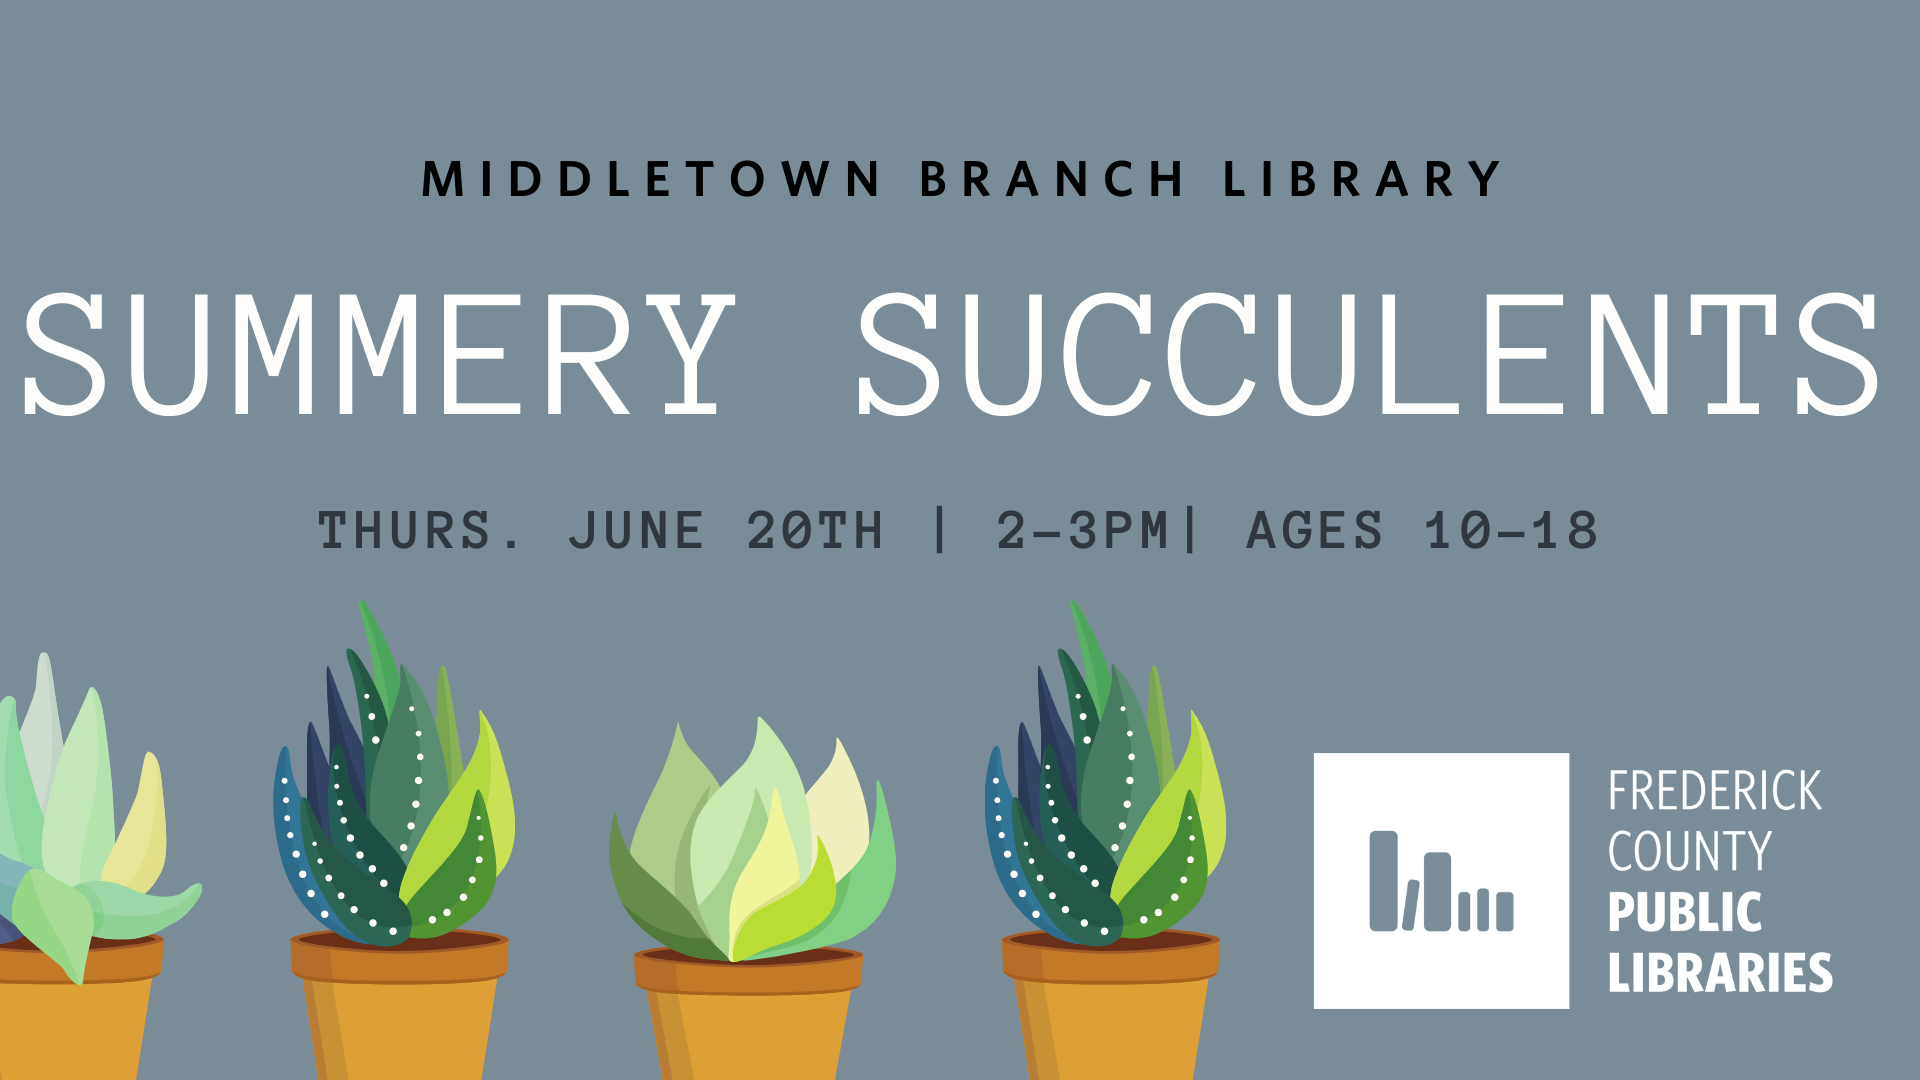 Summery Succulents Middletown Library Thursday June 20th 2-3pm 10-18 Ages